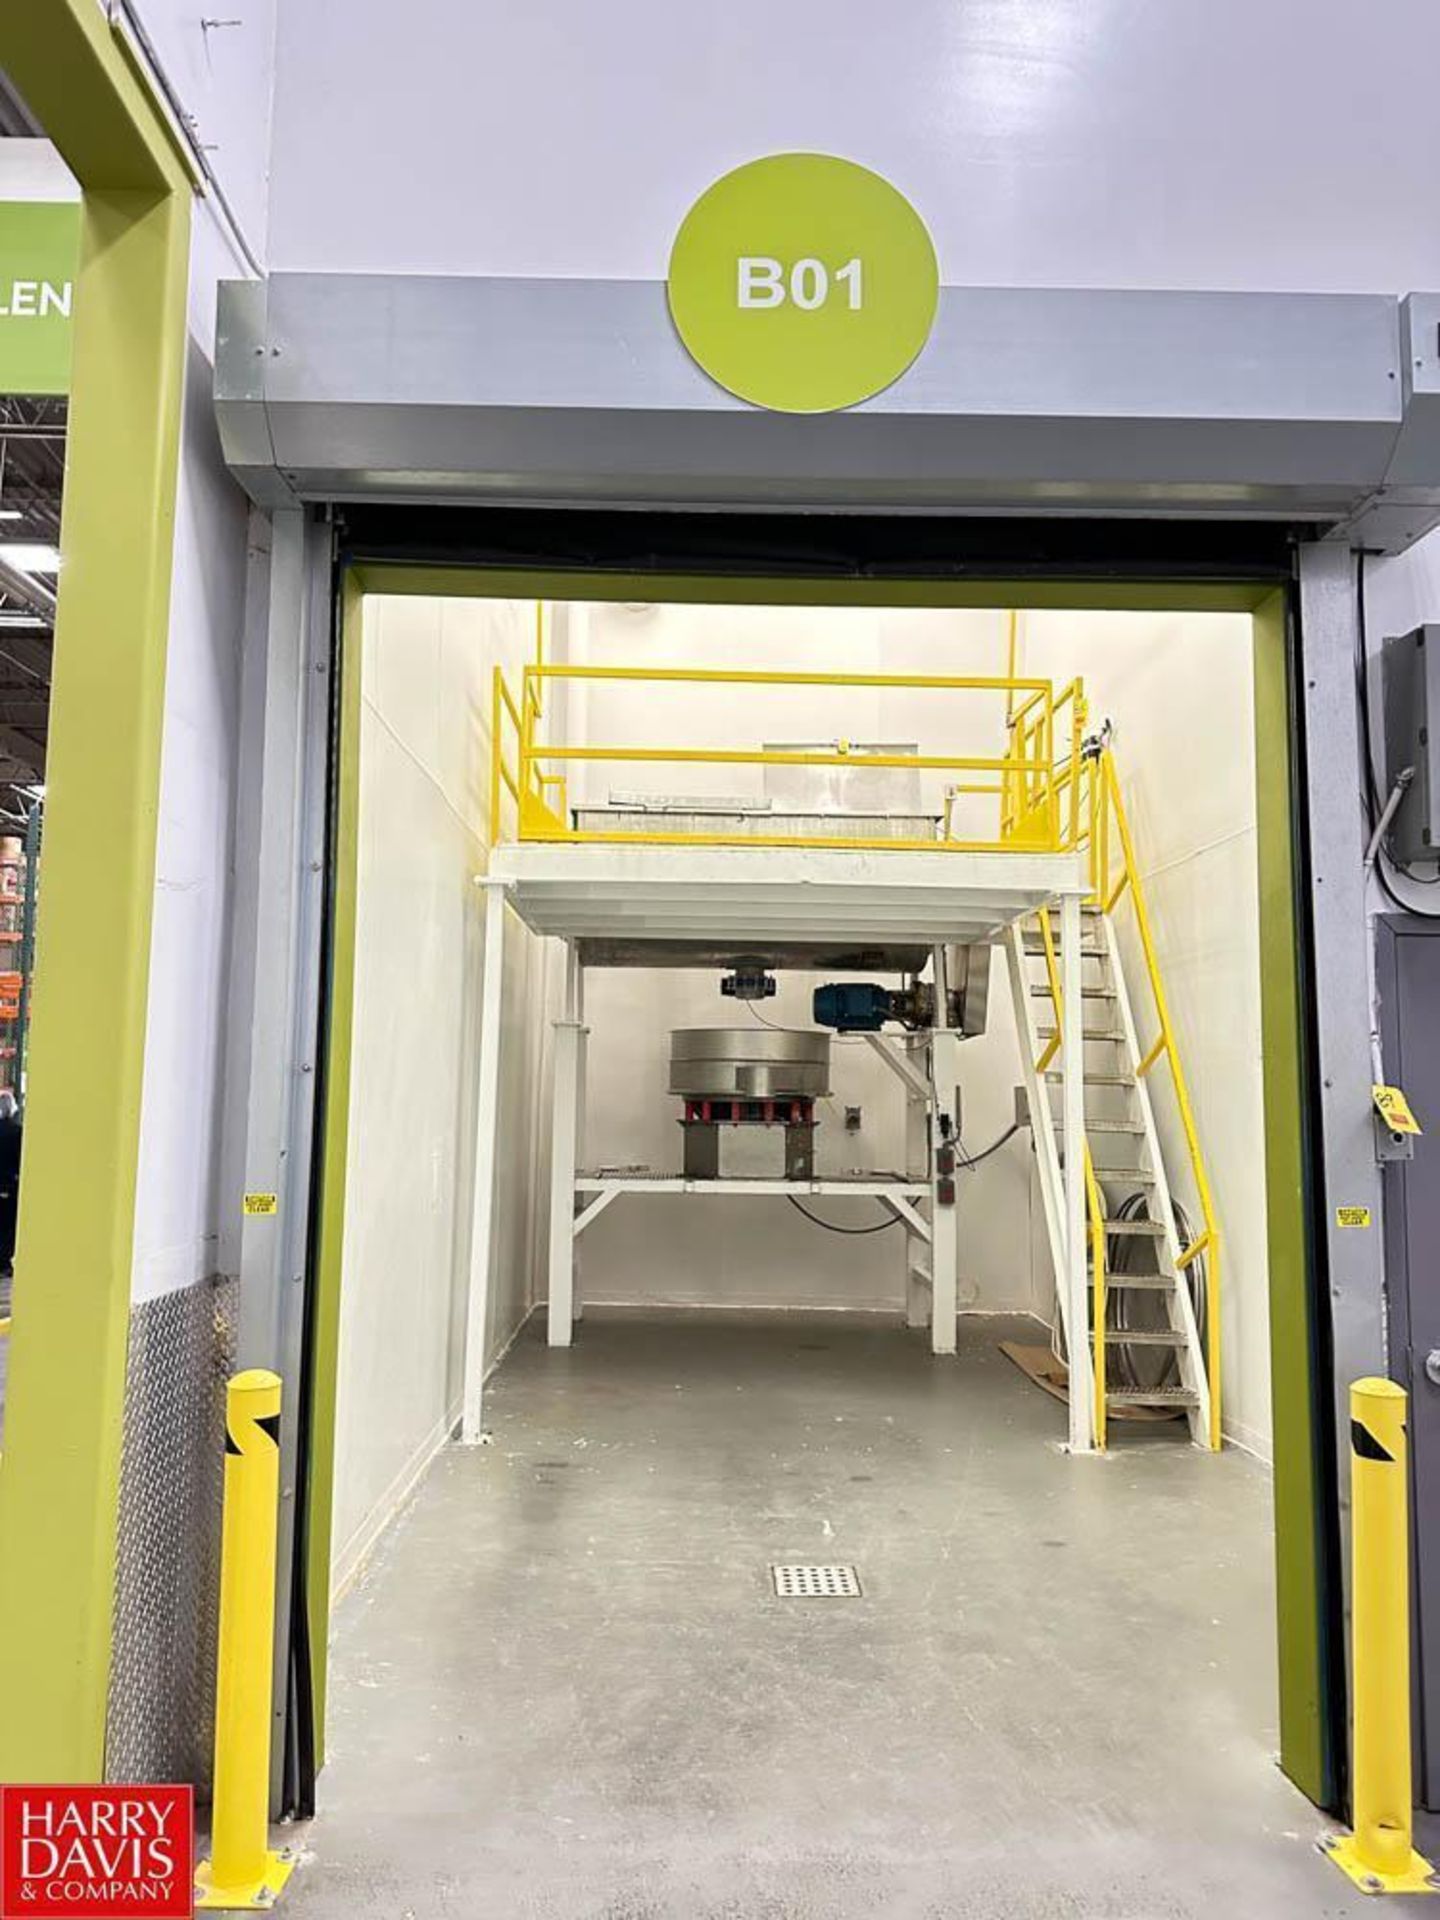 High Speed Roll-Up Door, Dimensions = 196" Width x 118" Height - Rigging Fee: $1250